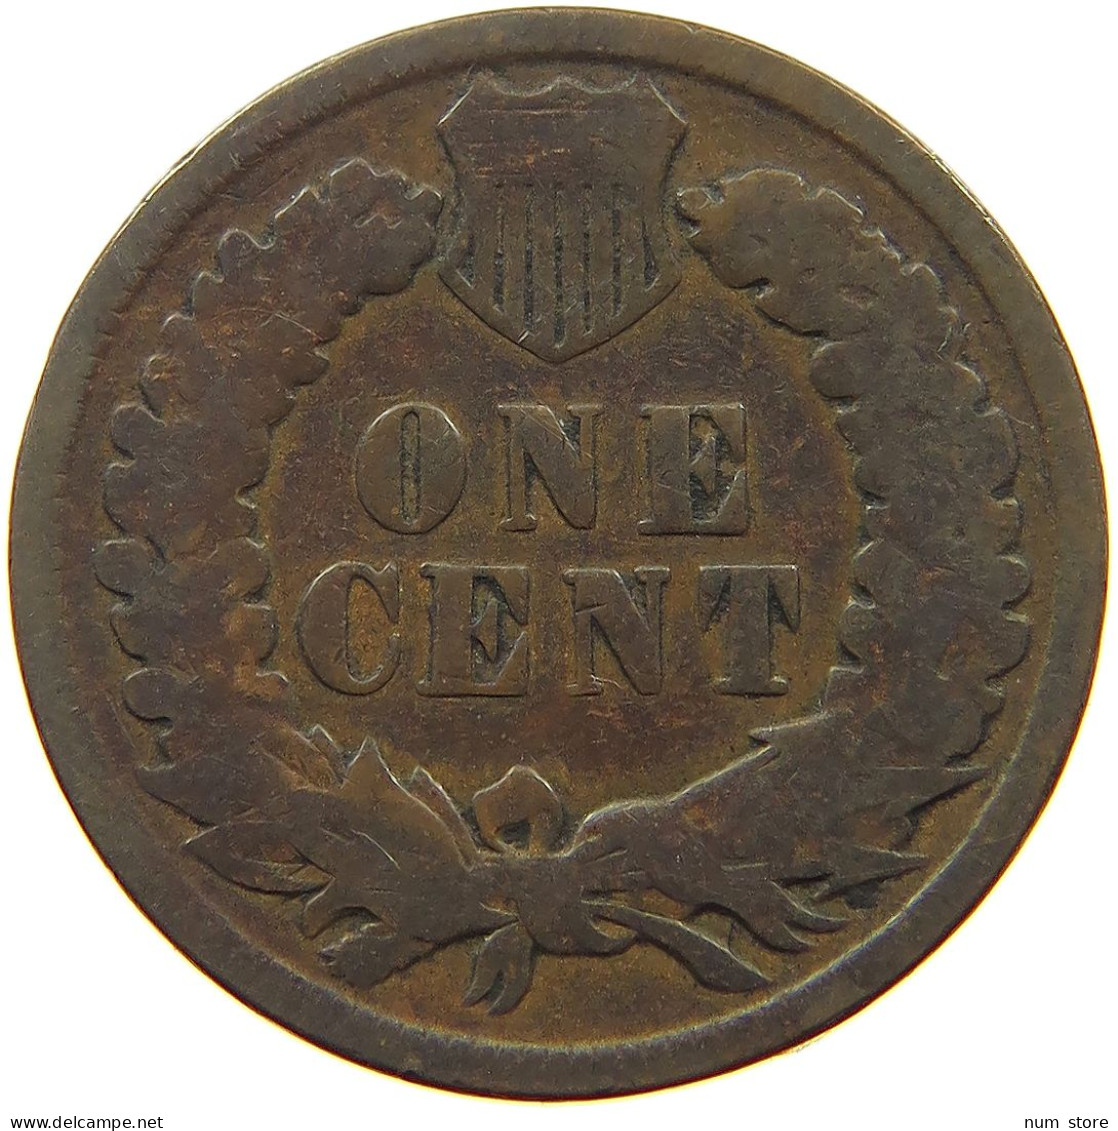 UNITED STATES OF AMERICA CENT 1889 INDIAN HEAD #s063 0483 - 1859-1909: Indian Head